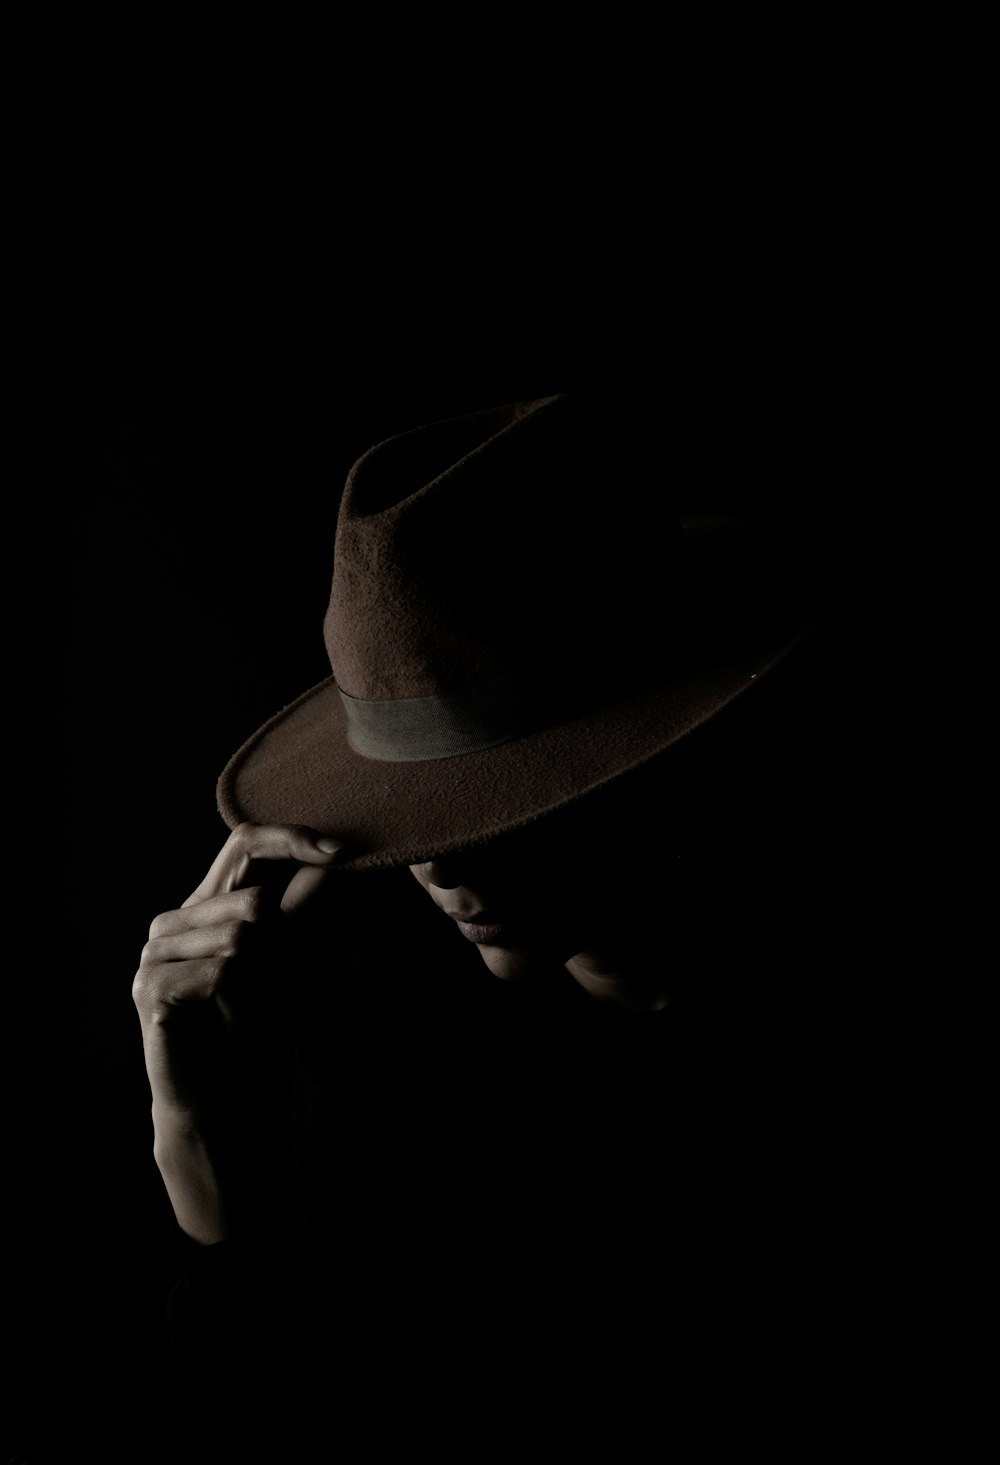 a person wearing a hat in the dark